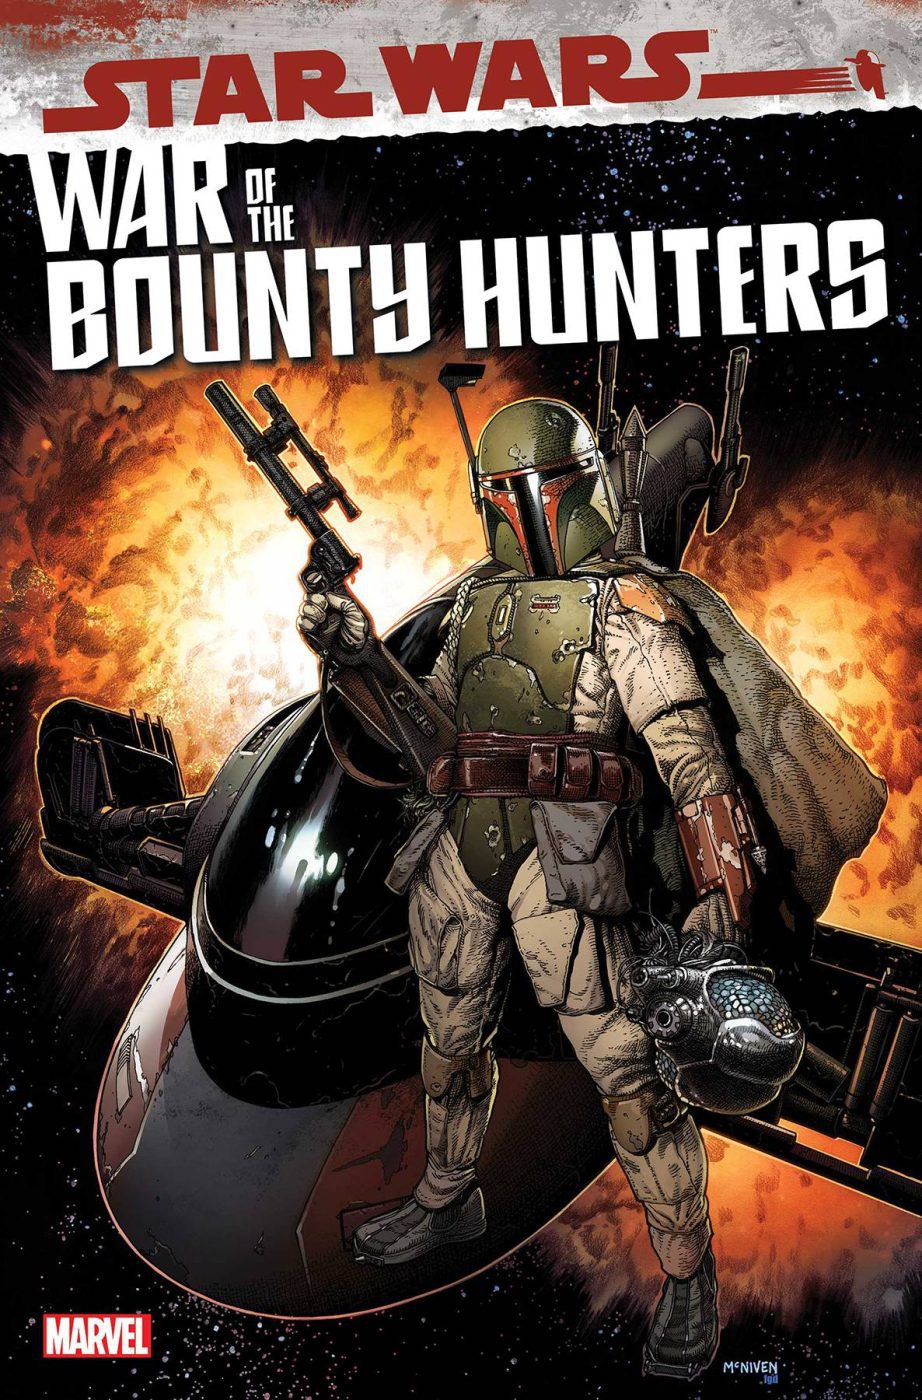 Star Wars War of the Bounty Hunters #1 (Steve McNiven A cover)